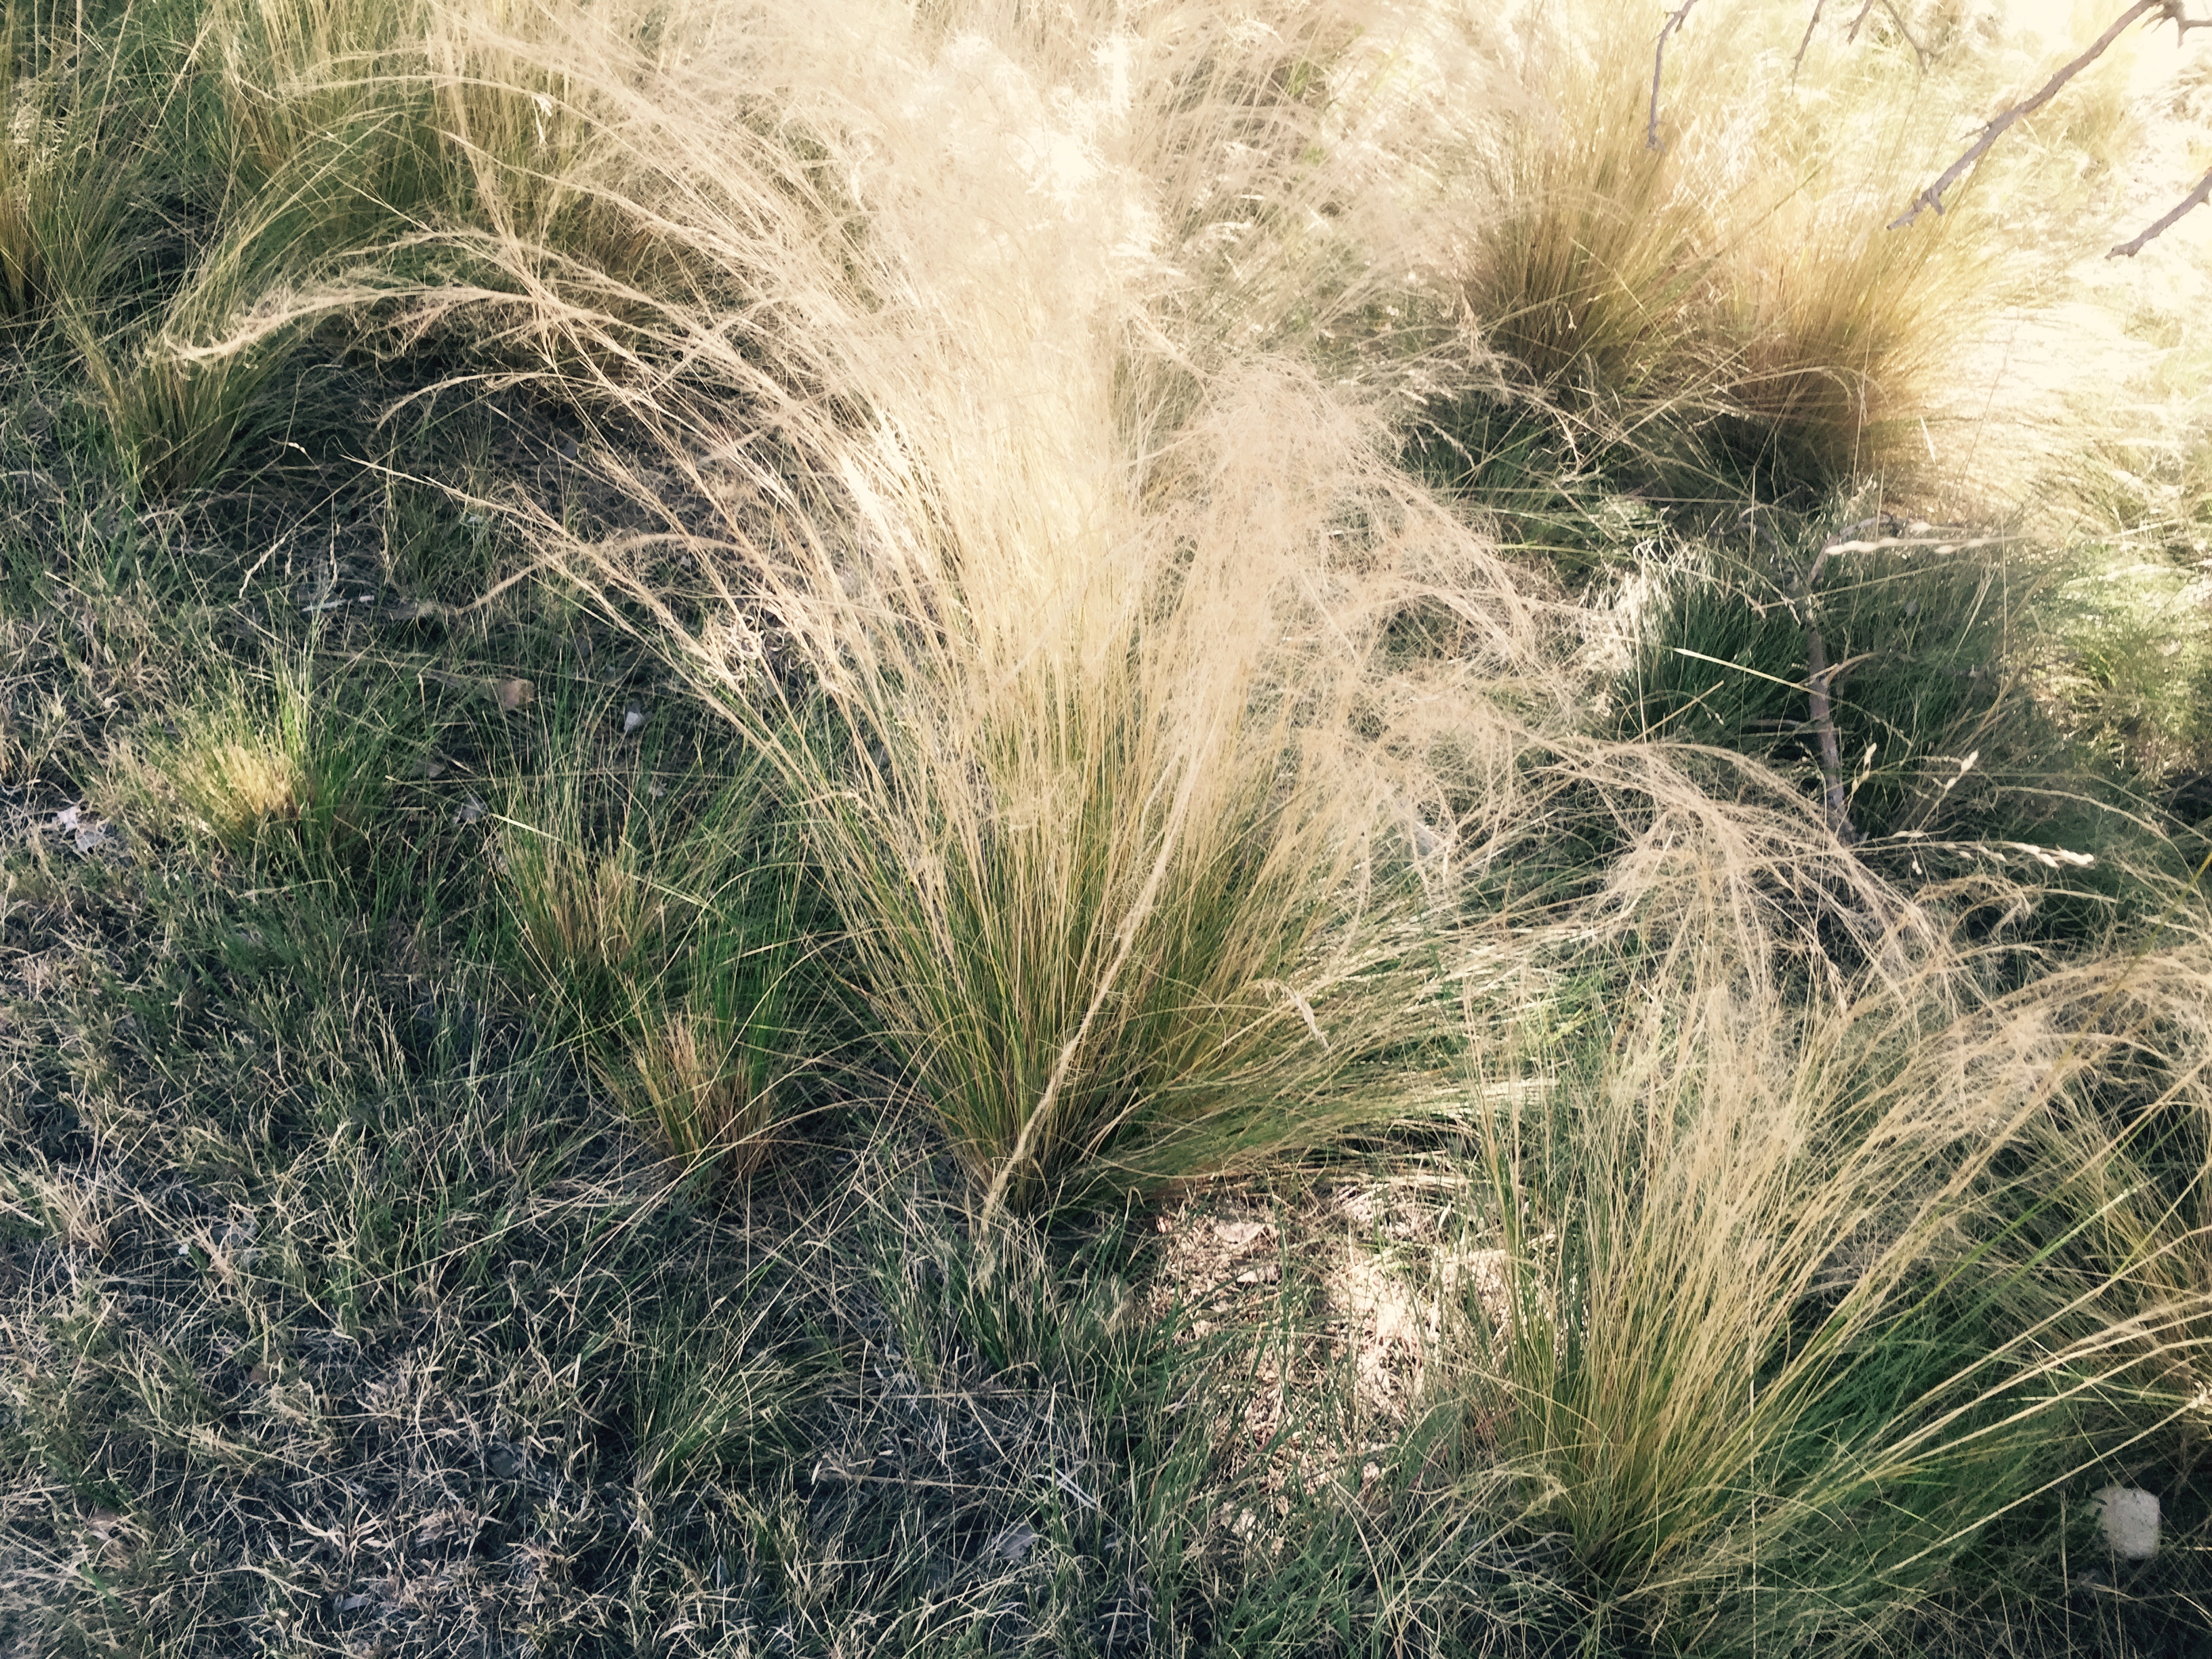 Bunchy growth habit with feathery, spreading seedheads and awns